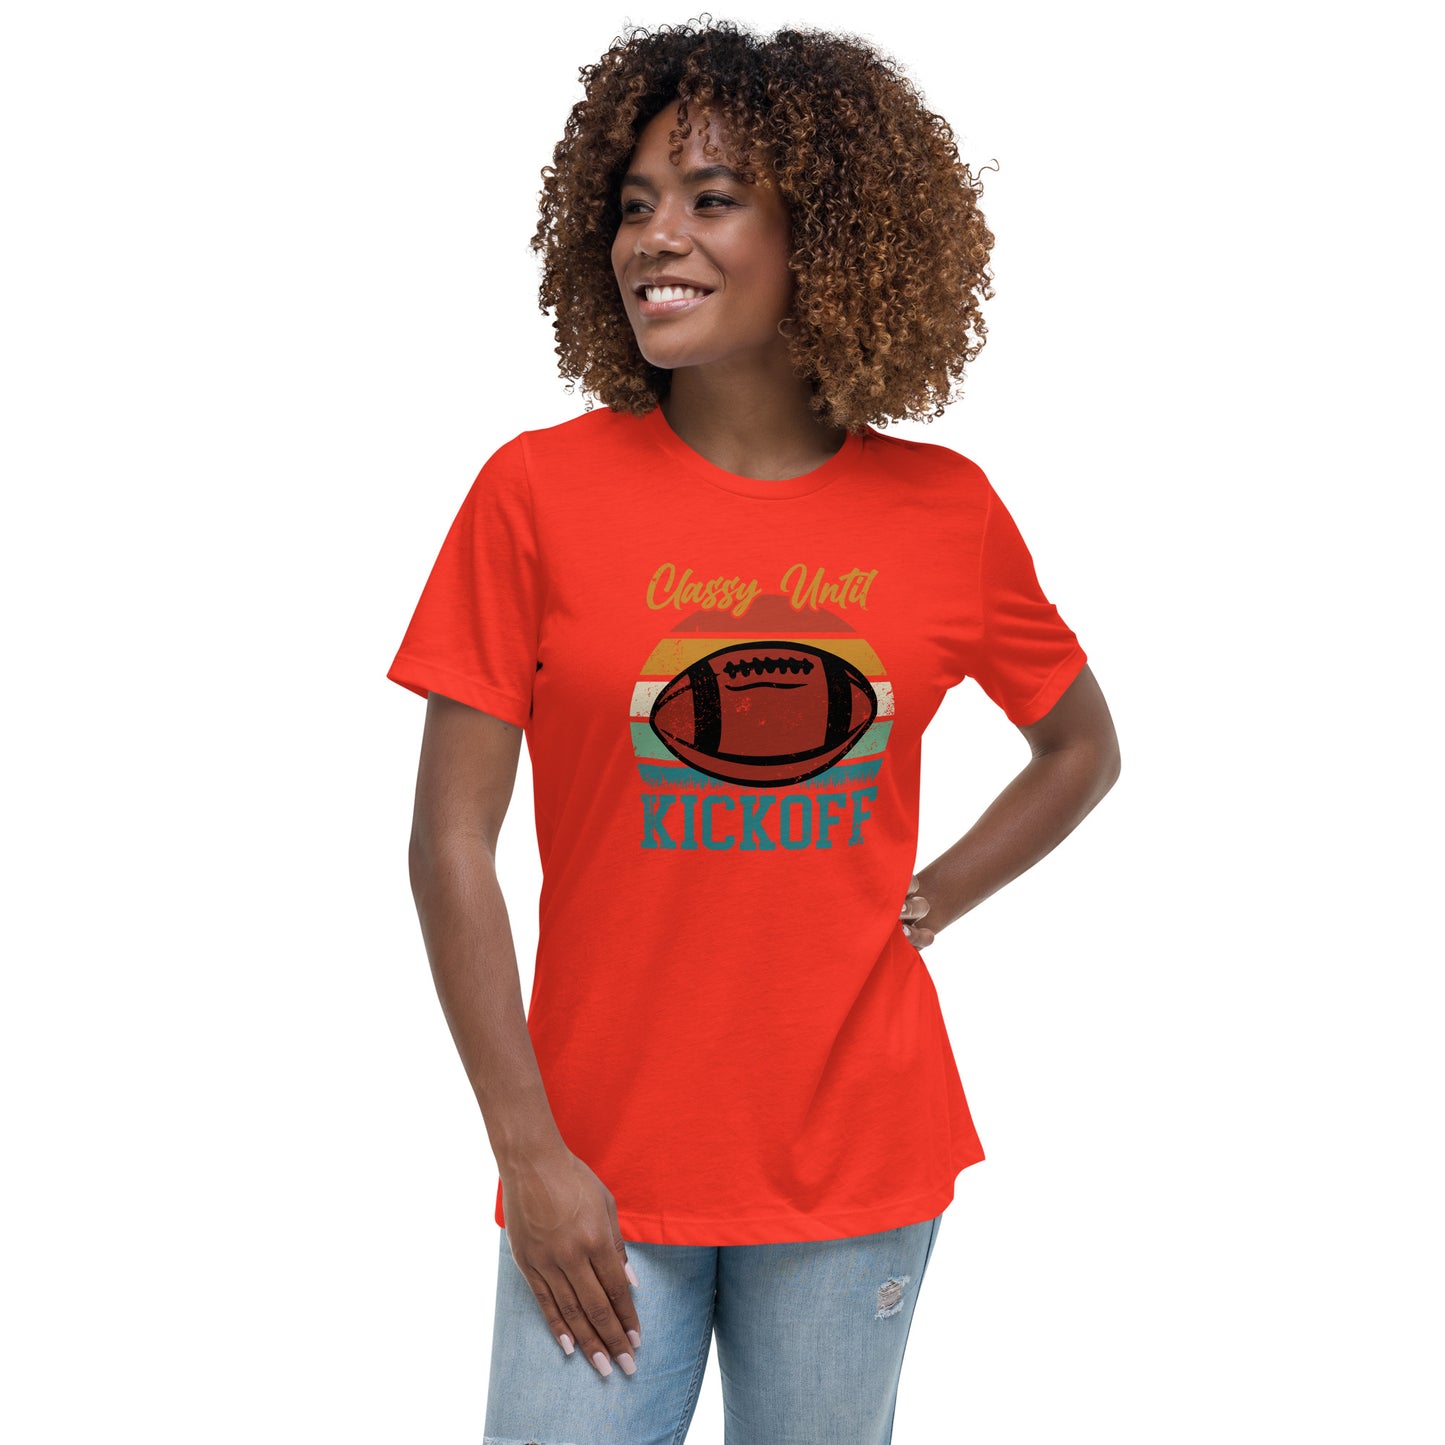 Classy Until Kickoff Women's Relaxed T-Shirt